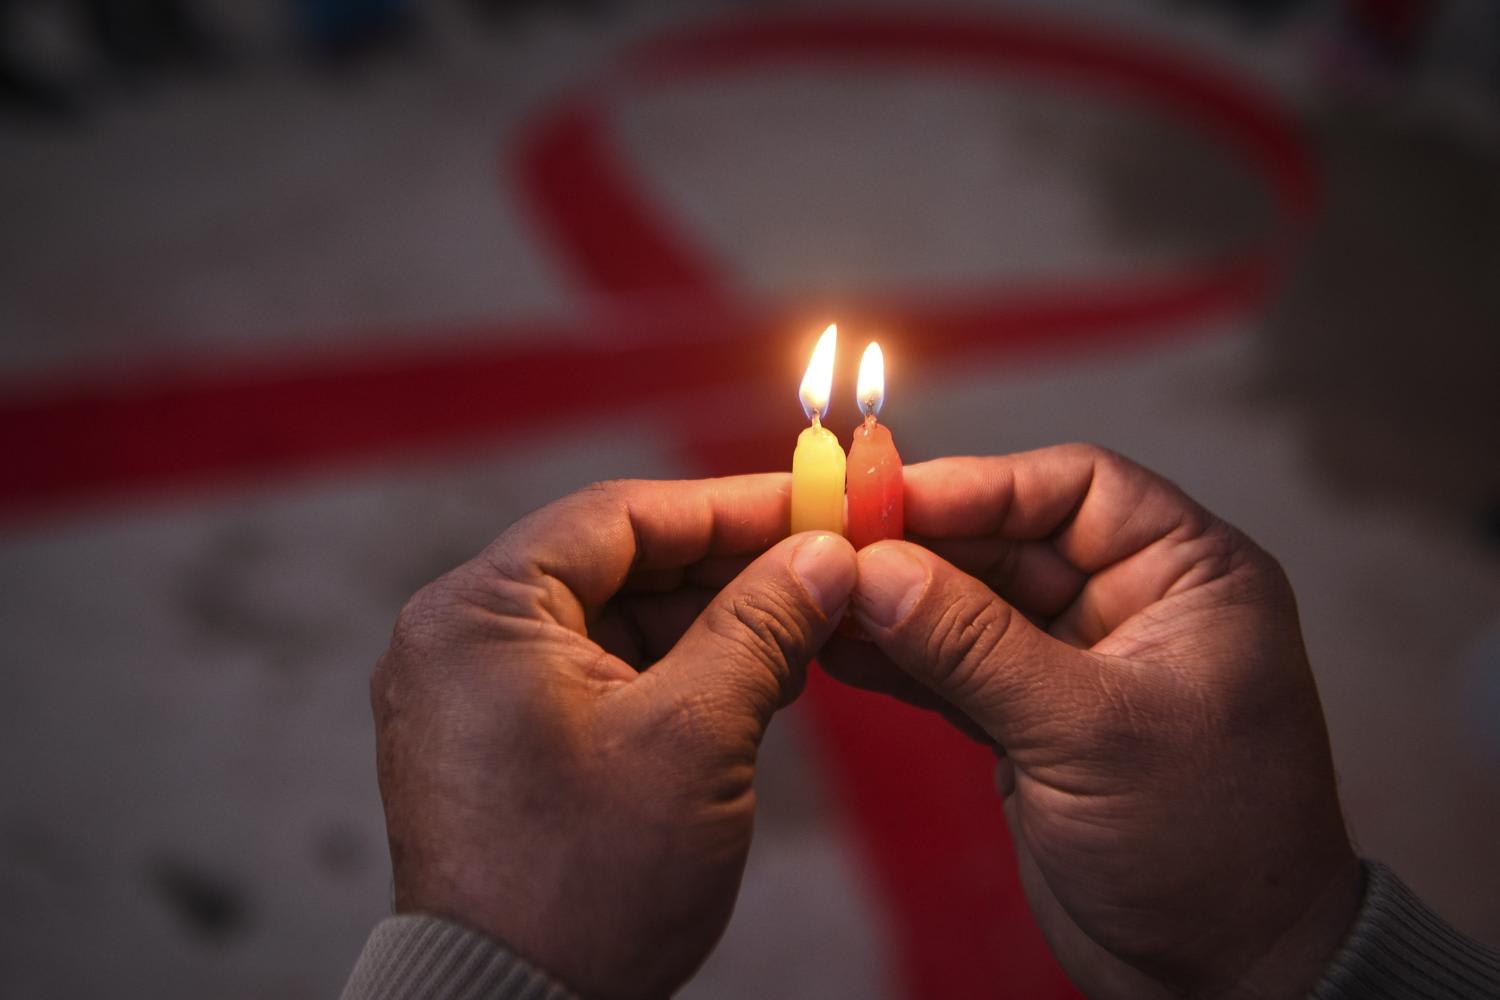 A volunteer lights candles forming the shape of a red ribbon during an awareness event on the eve of World Aids Day, in Kathmandu, Nepal, on Nov 30, 2020.